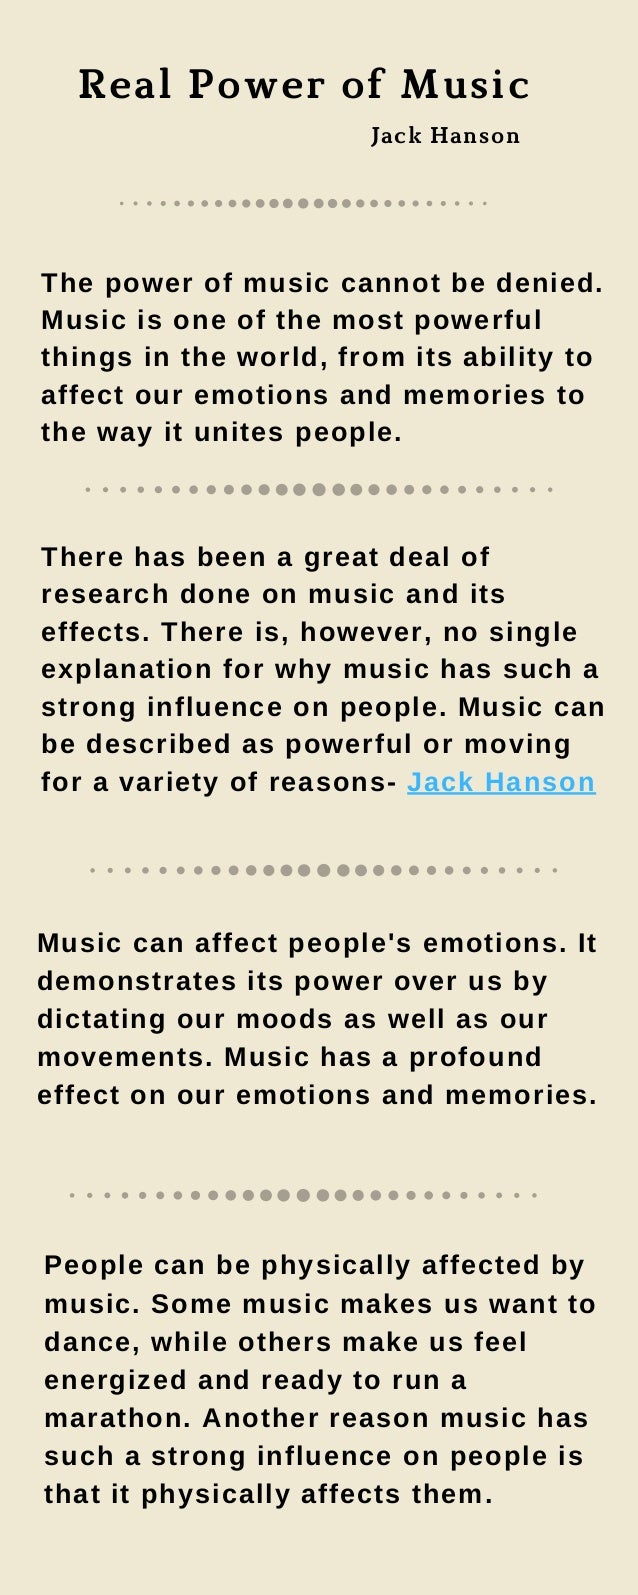 Real Power of Music
The power of music cannot be denied.
Music is one of the most powerful
things in the world, from its ability to
affect our emotions and memories to
the way it unites people.
There has been a great deal of
research done on music and its
effects. There is, however, no single
explanation for why music has such a
strong influence on people. Music can
be described as powerful or moving
for a variety of reasons- Jack Hanson
Music can affect people's emotions. It
demonstrates its power over us by
dictating our moods as well as our
movements. Music has a profound
effect on our emotions and memories.
People can be physically affected by
music. Some music makes us want to
dance, while others make us feel
energized and ready to run a
marathon. Another reason music has
such a strong influence on people is
that it physically affects them.
Jack Hanson
 